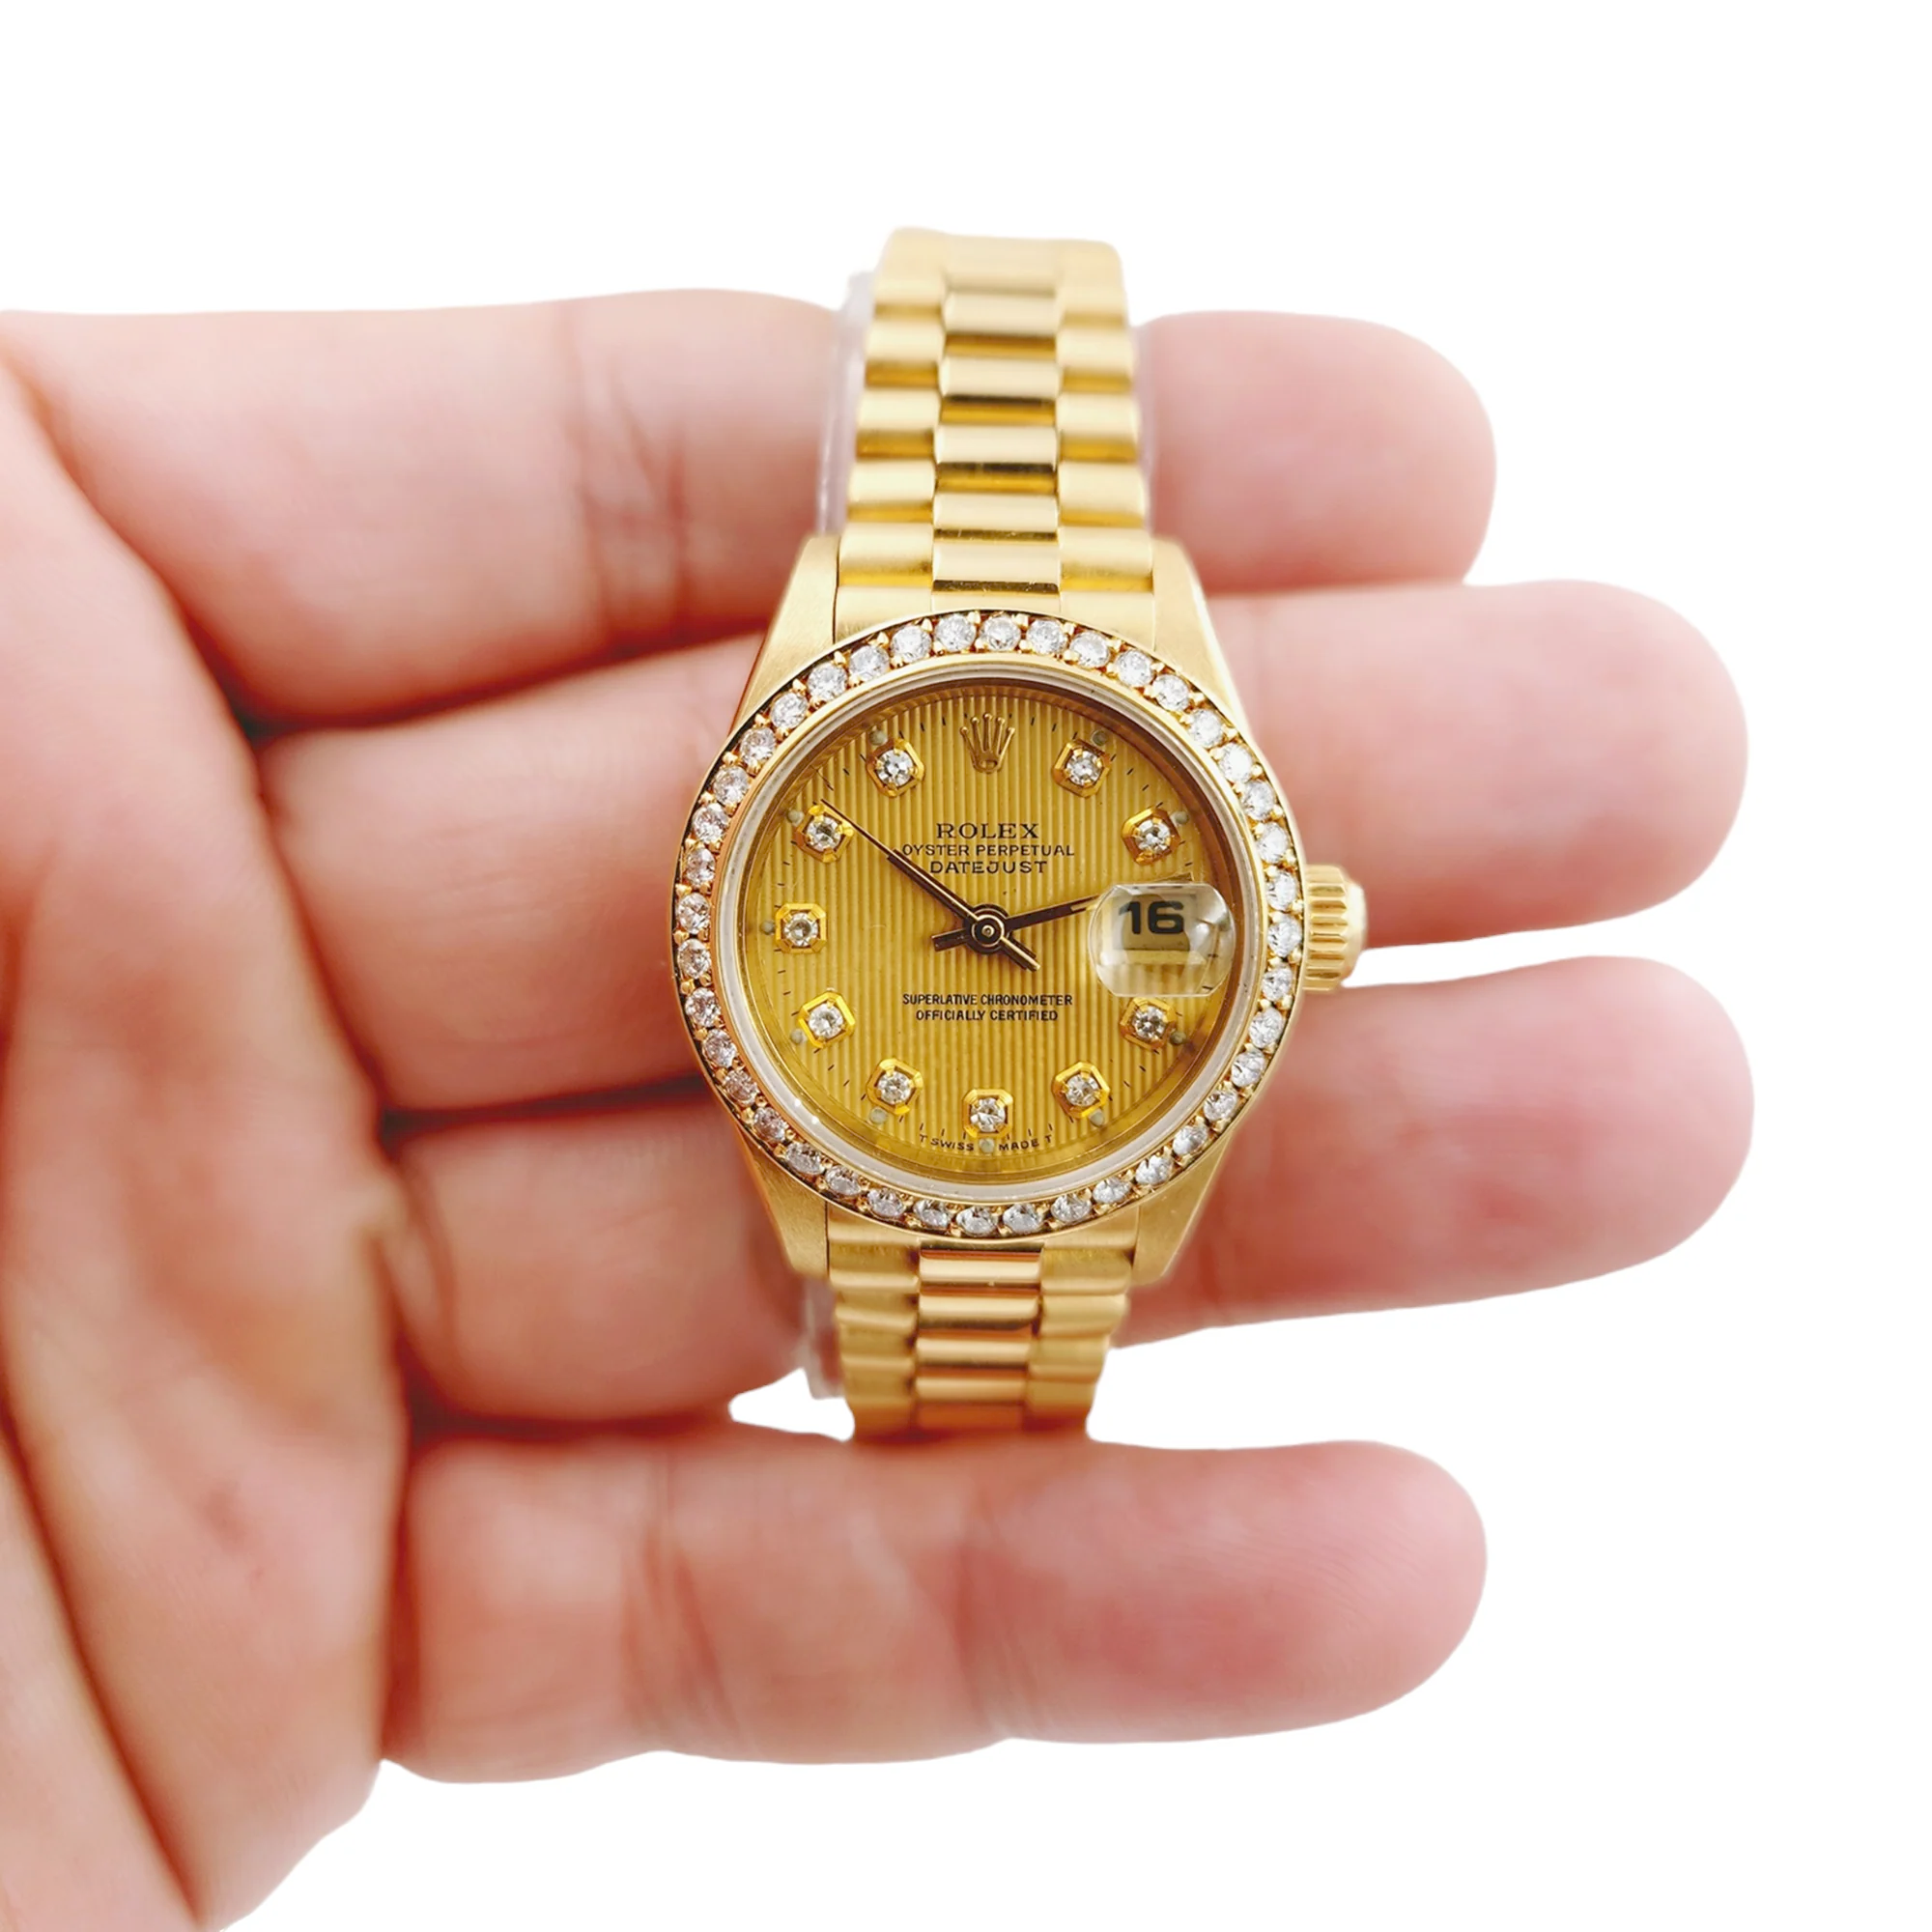 Ladies Rolex 26mm Presidential 18K Solid Yellow Gold Watch with Gold Tapestry Diamond Dial and Diamond Bezel. (Pre-Owned 69174)